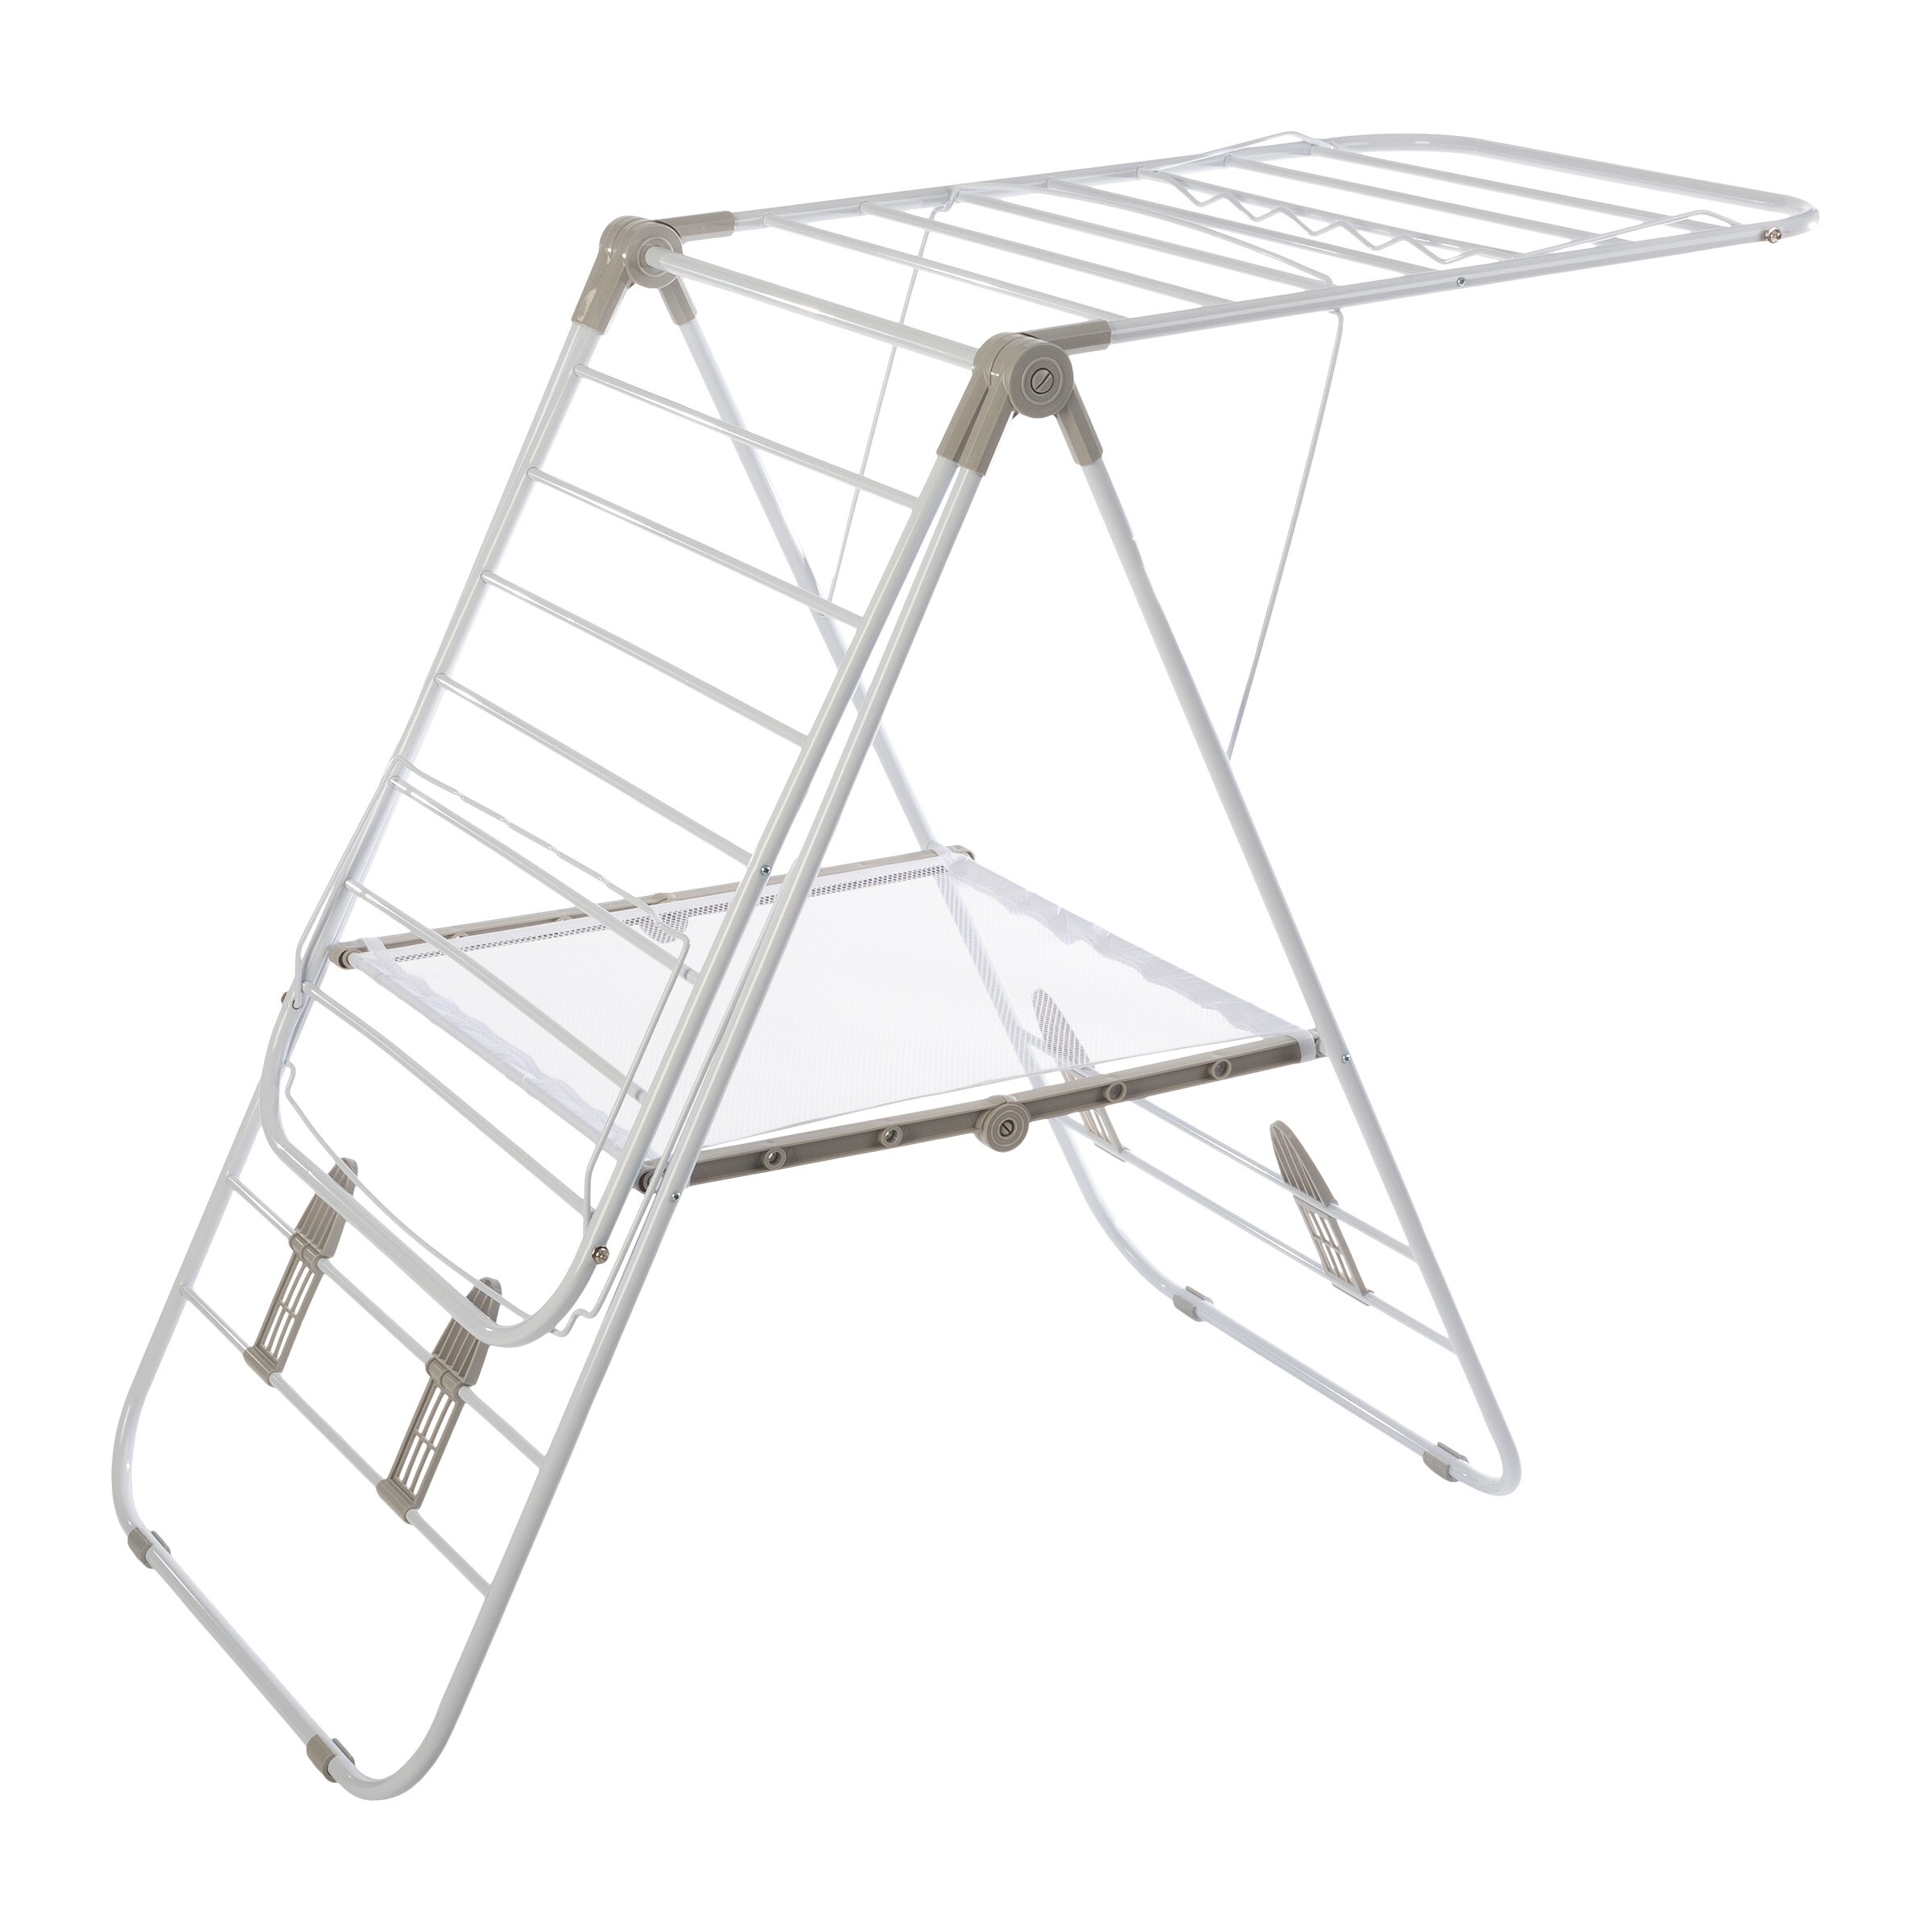 https://ak1.ostkcdn.com/images/products/is/images/direct/0e6166167798ffb1db0accbf40b02a3a4ba9e206/Clothes-Drying-Rack---Indoor-Outdoor-Portable-Laundry-Rack---Collapsible-Clothes-Stand-by-Everyday-Home-%28White%29.jpg